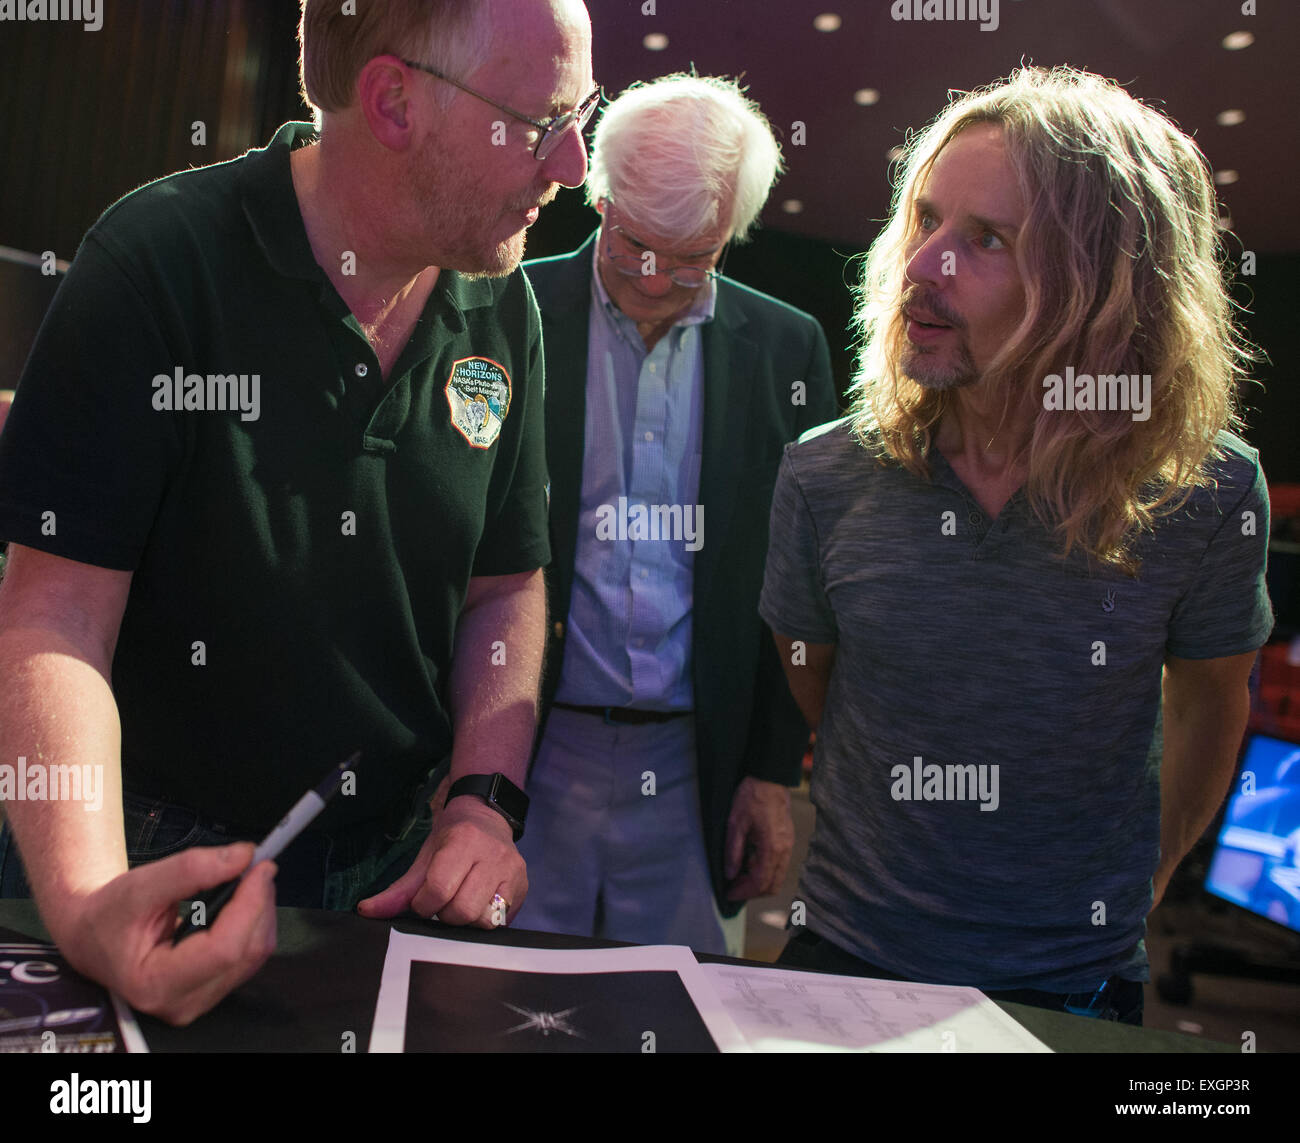 Mark Showalter, left, who discovered Pluto's moon Styx in 2012, speaks with Tommy Shaw of the band Styx, Wednesday, July 1, 2015 at The Johns Hopkins University Applied Physics Laboratory in Laurel, Md.  Members of the band Styx visited with New Horizons team members and received a tour of the mission operations center. Stock Photo